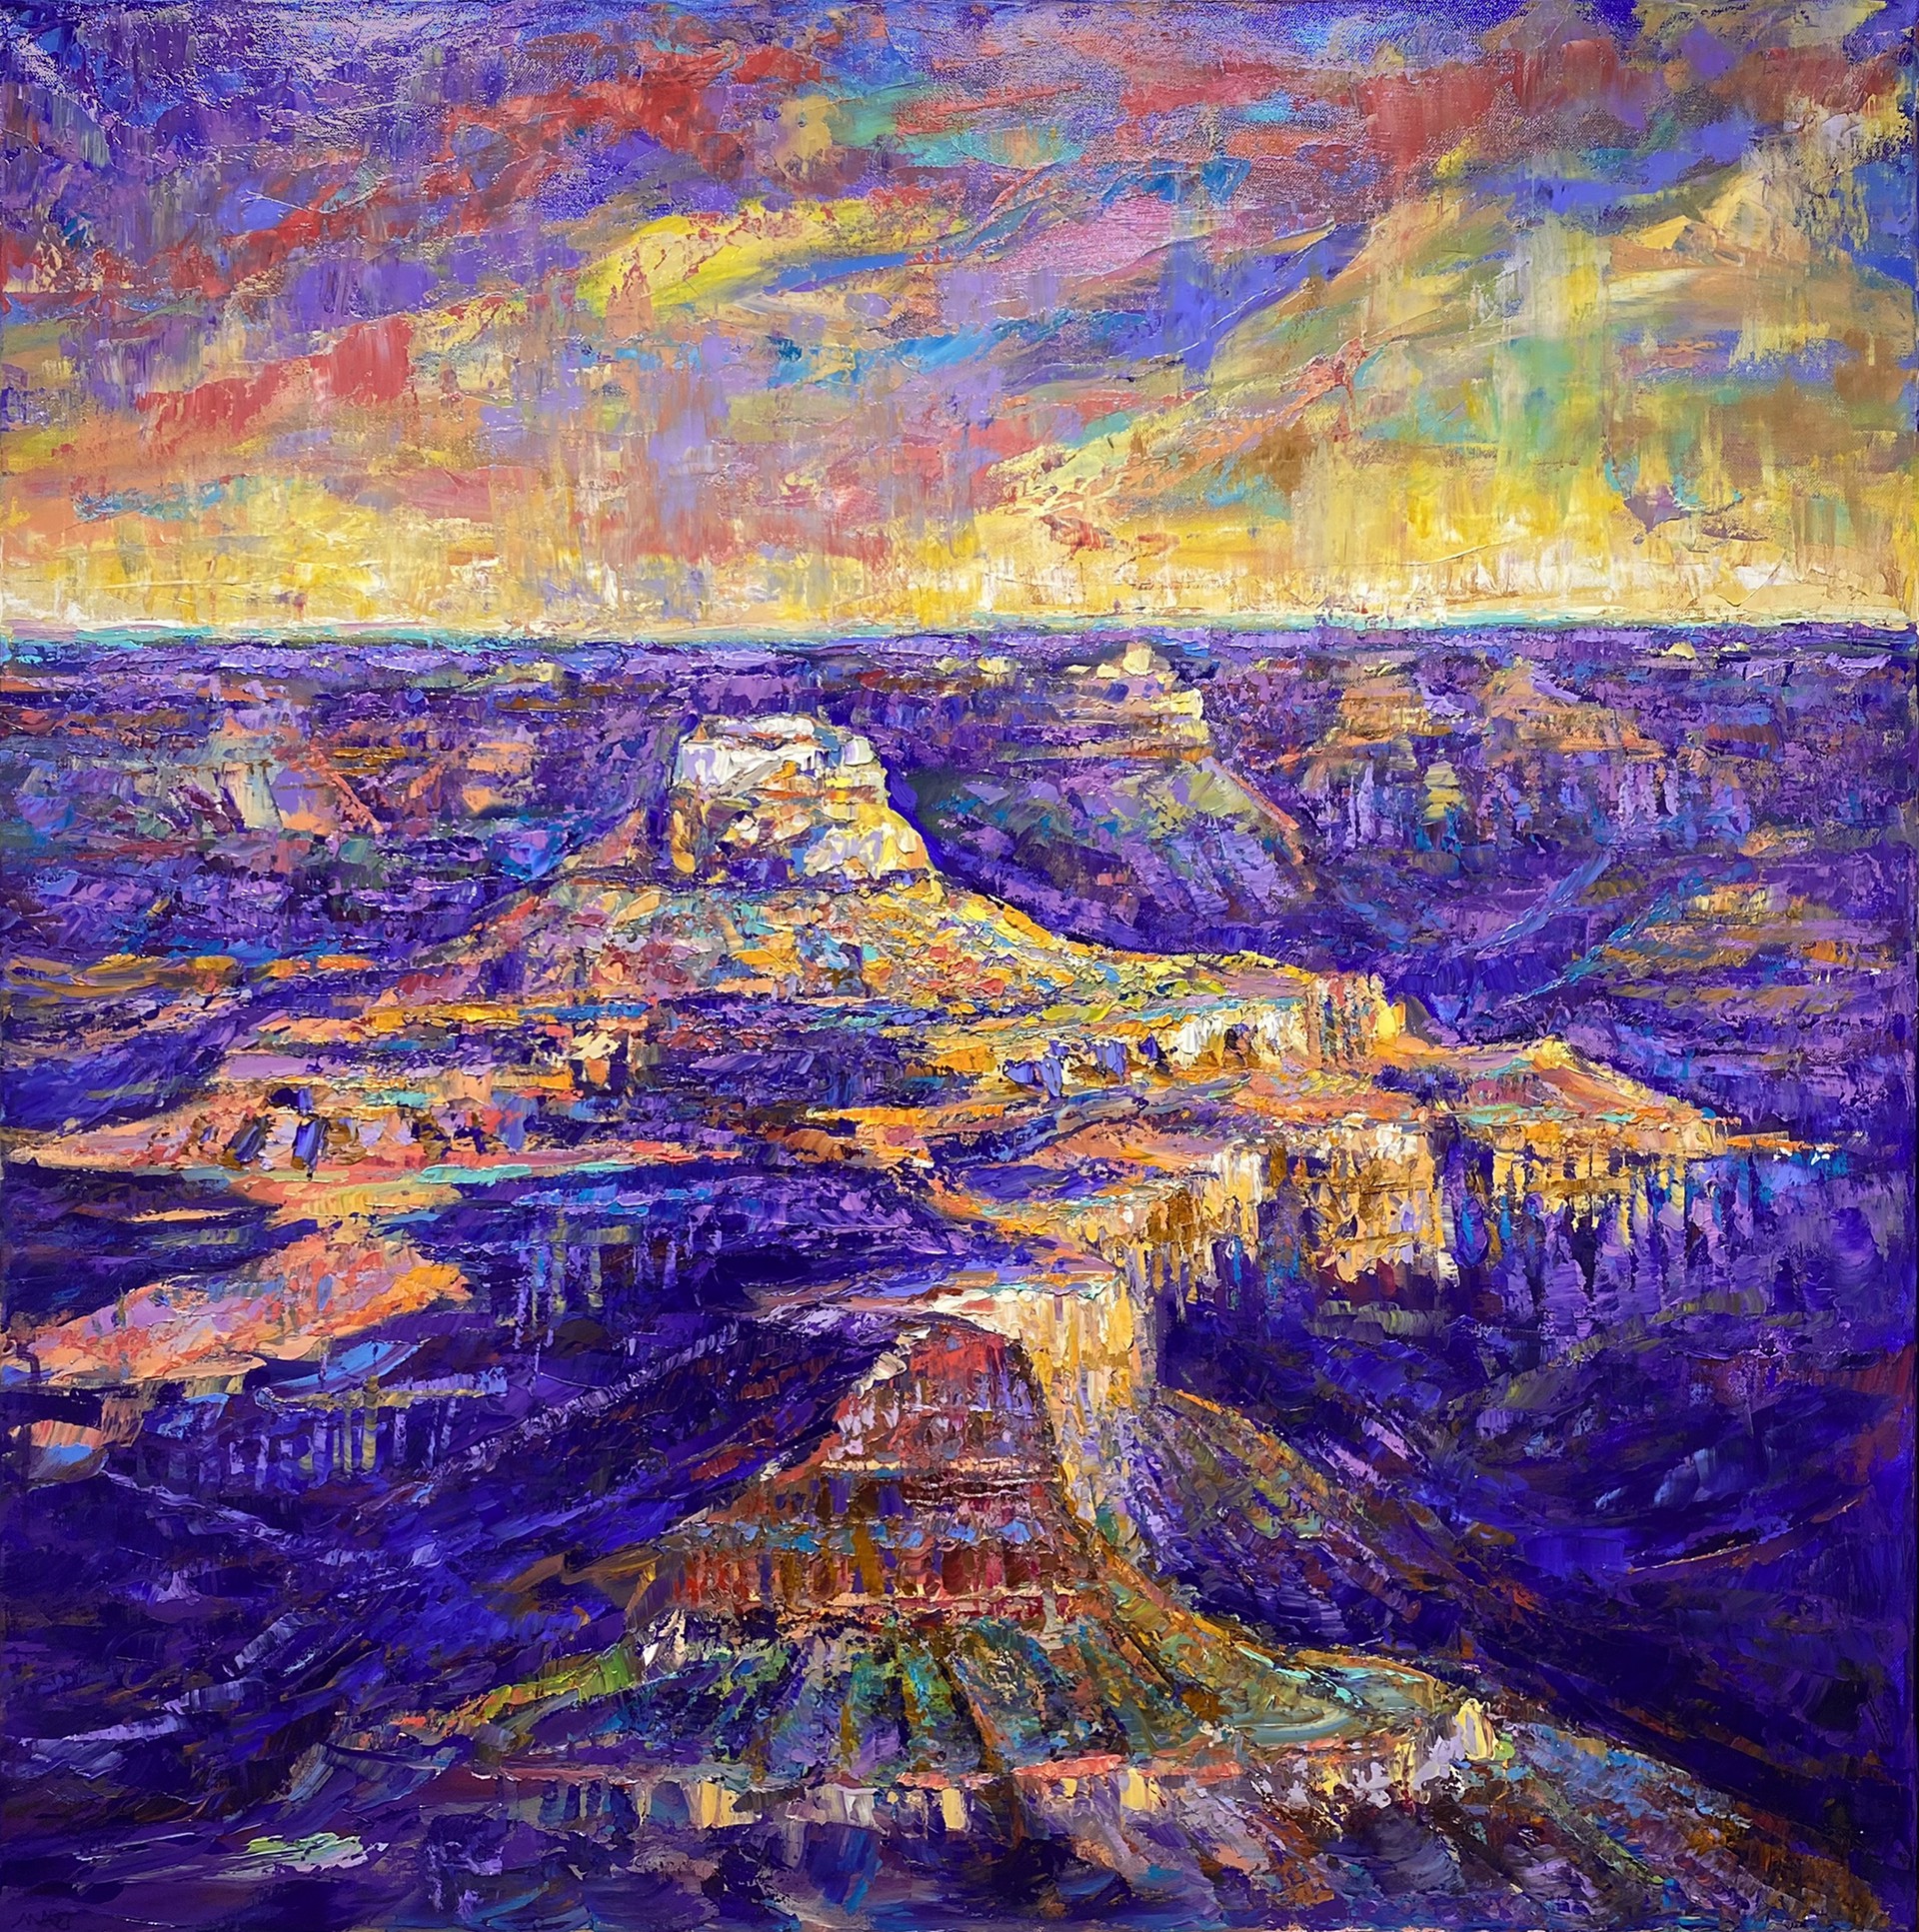 South Rim - Points of Light by Barbara Meikle